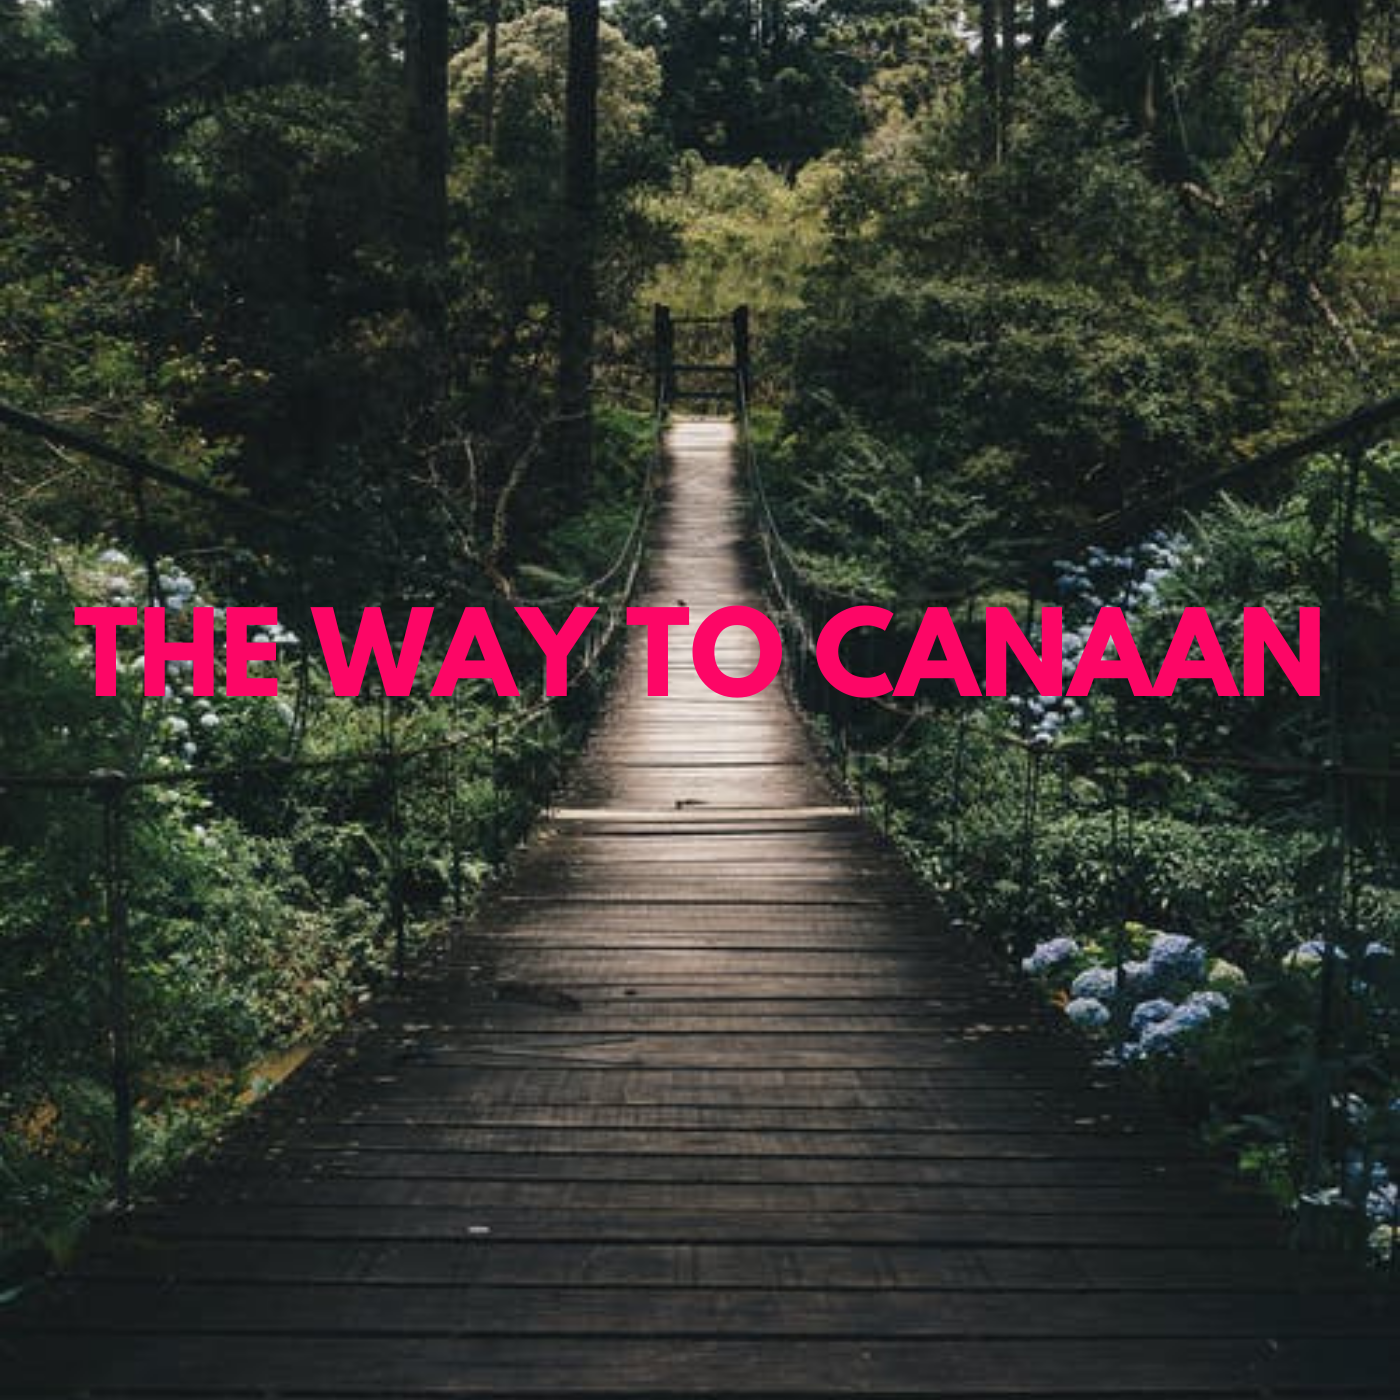 THE WAY TO CANAAN